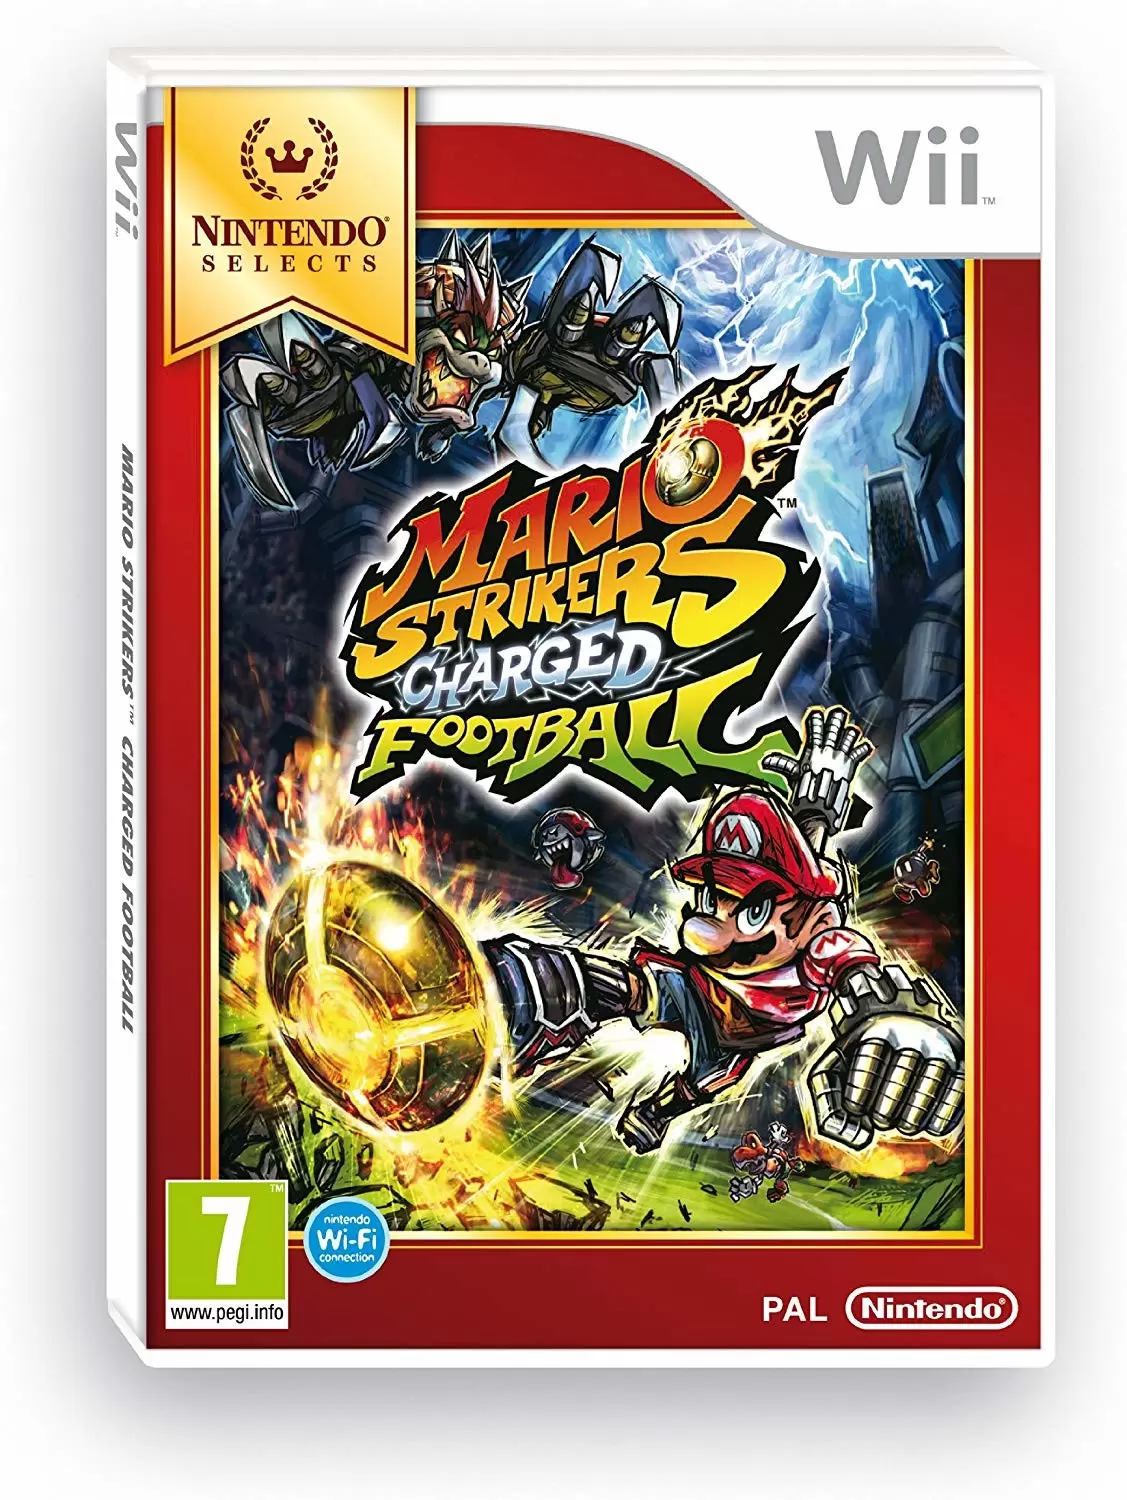 Jeux Nintendo Wii - Mario strikers charged football nintendo selects